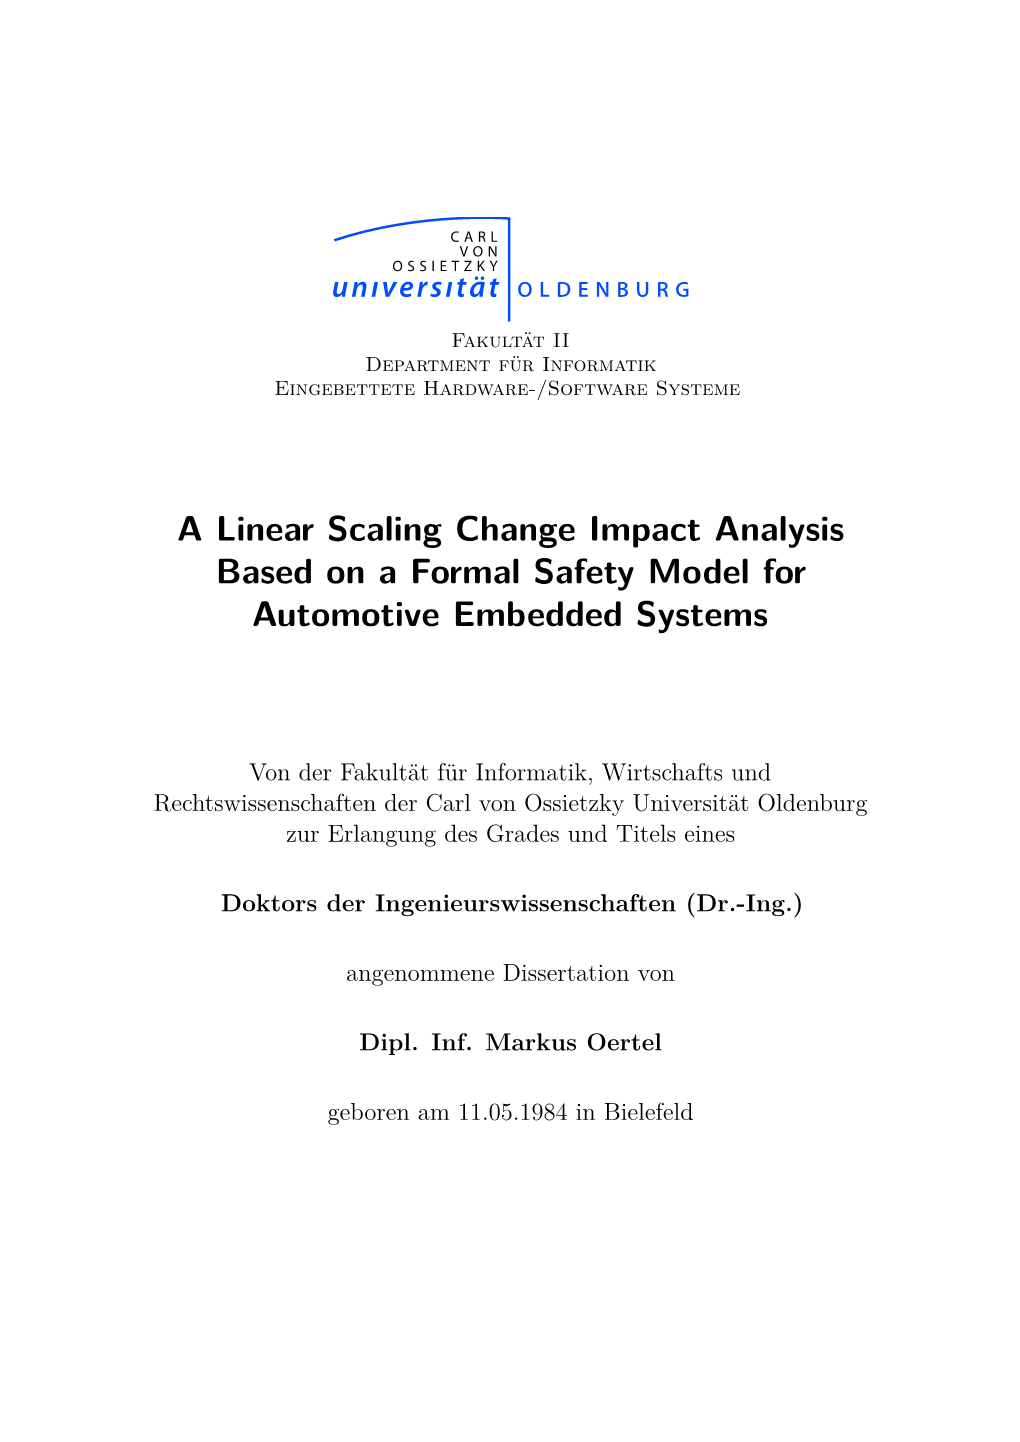 A Linear Scaling Change Impact Analysis Based on a Formal Safety Model for Automotive Embedded Systems